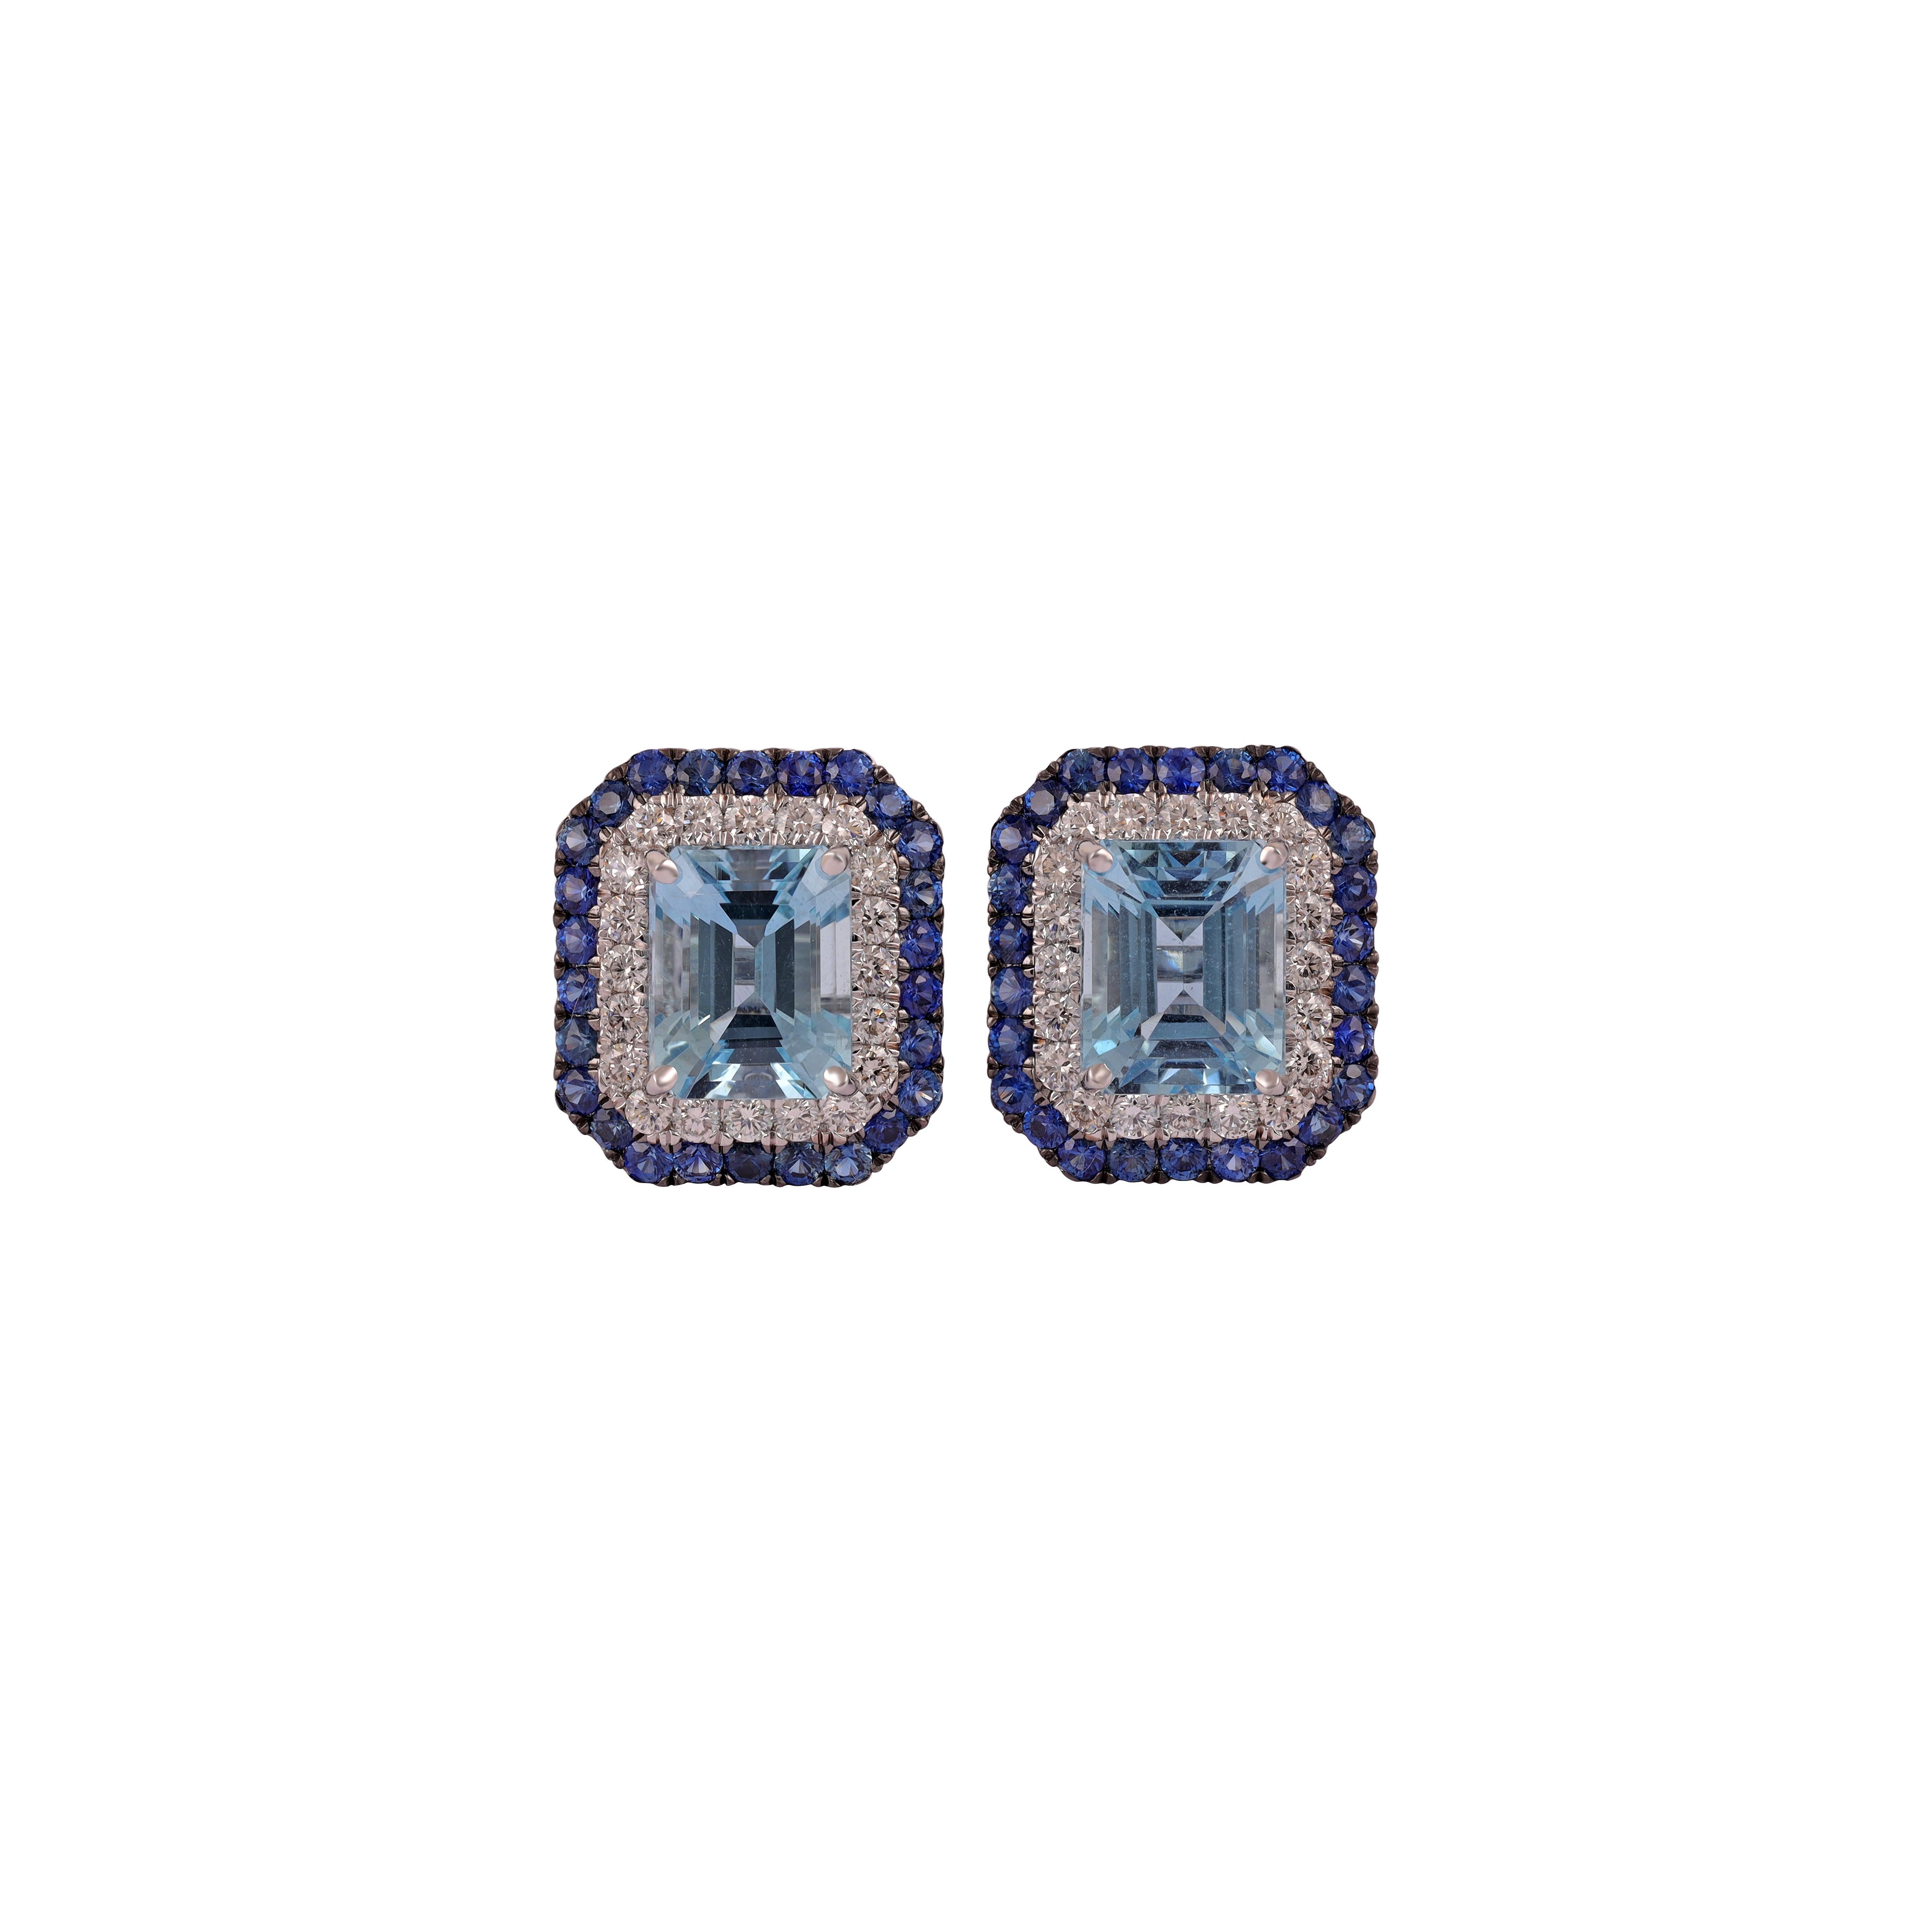 This collection features an array of aquamarines with an icy blue hue that is as cool as it gets! Accented with diamonds these Earrings  are made in white gold and present a classic yet elegant look.

Aquamarine Stud Earring with Diamond in 18 Karat